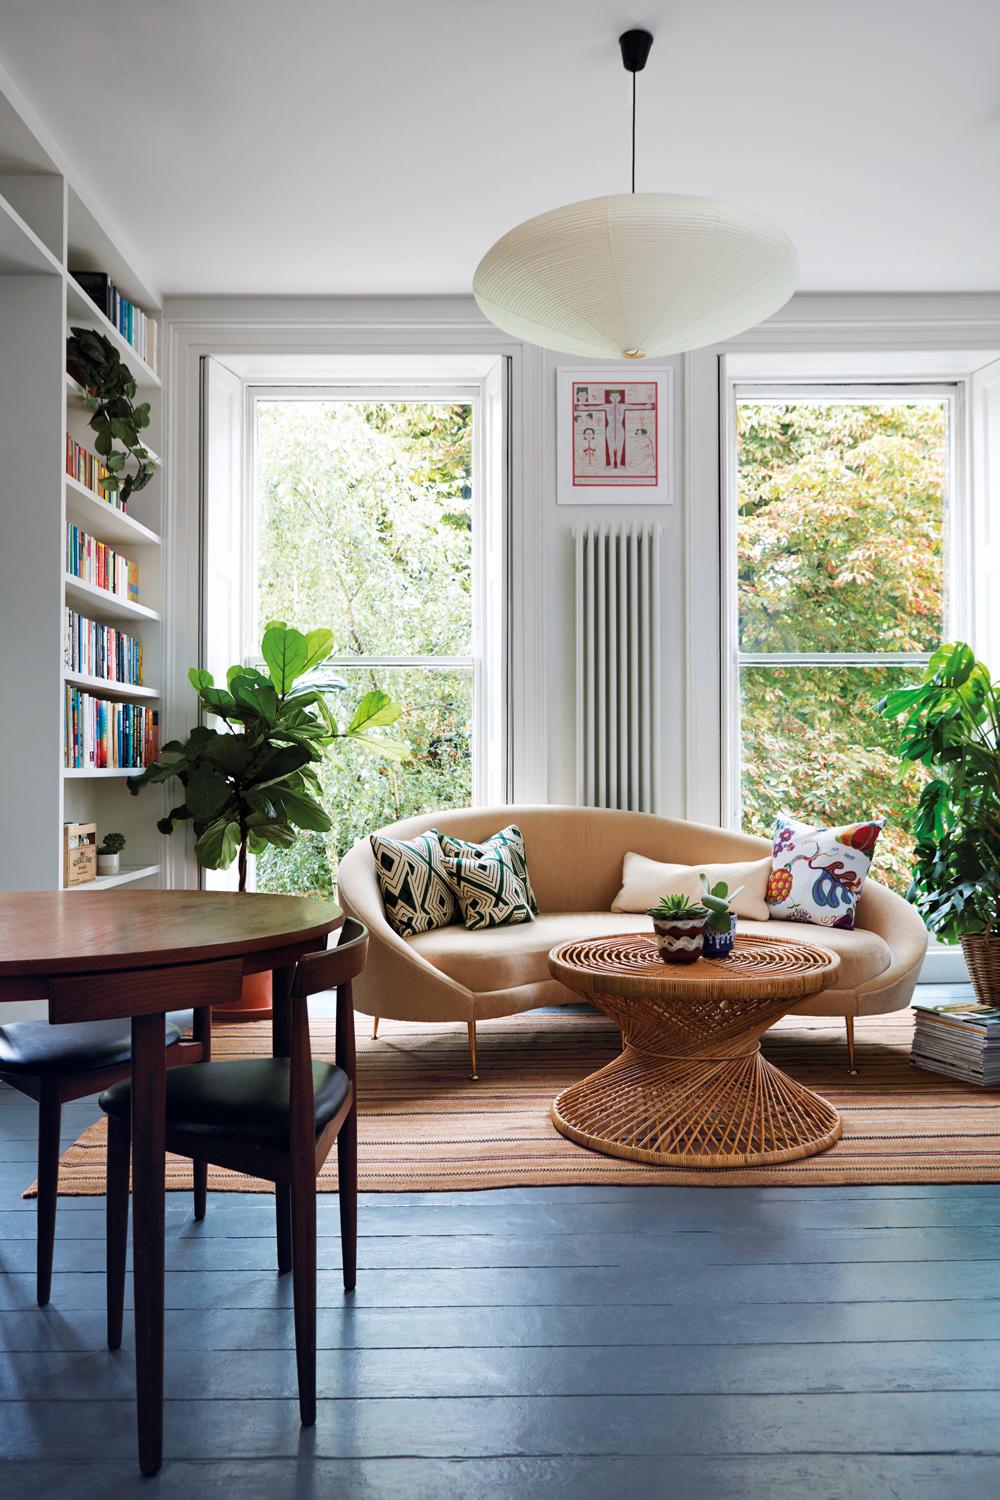 Little Wonder: A 520sqft London Abode That Is Big On Style